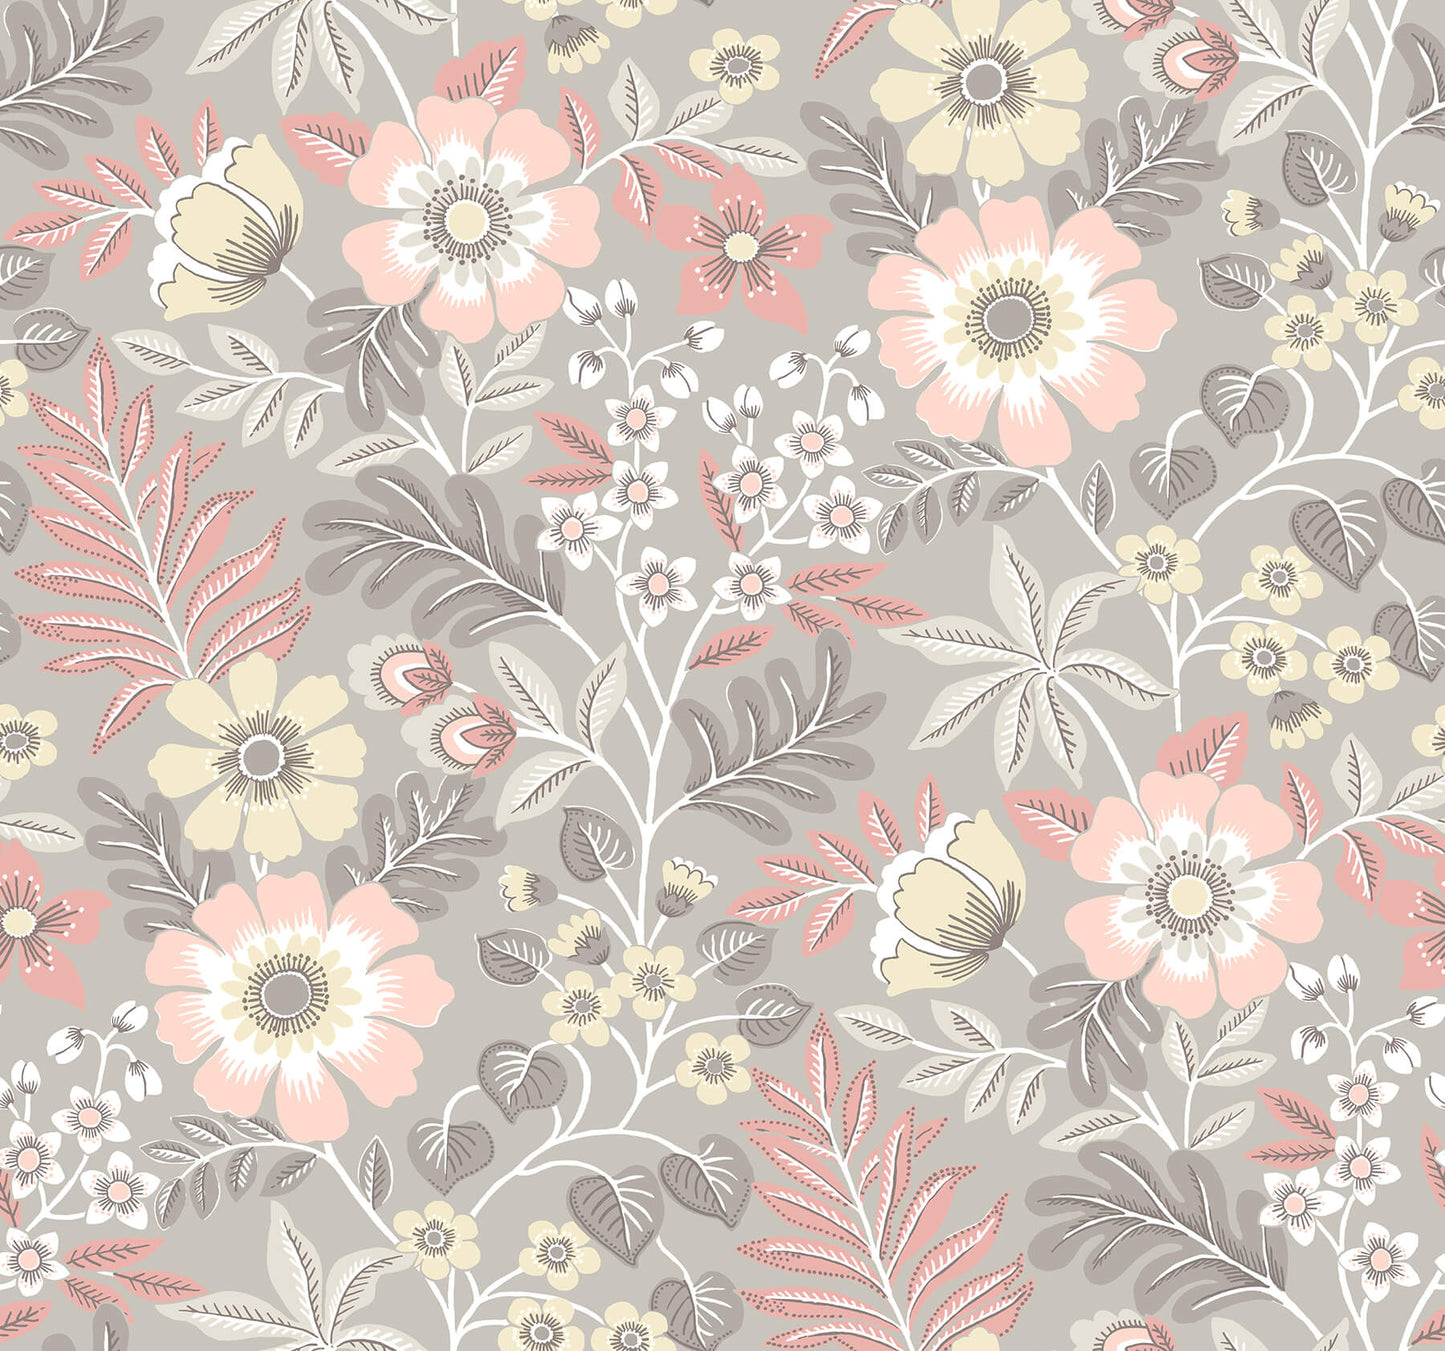 A-Street Prints Revival Wallpaper Collection - SAMPLE